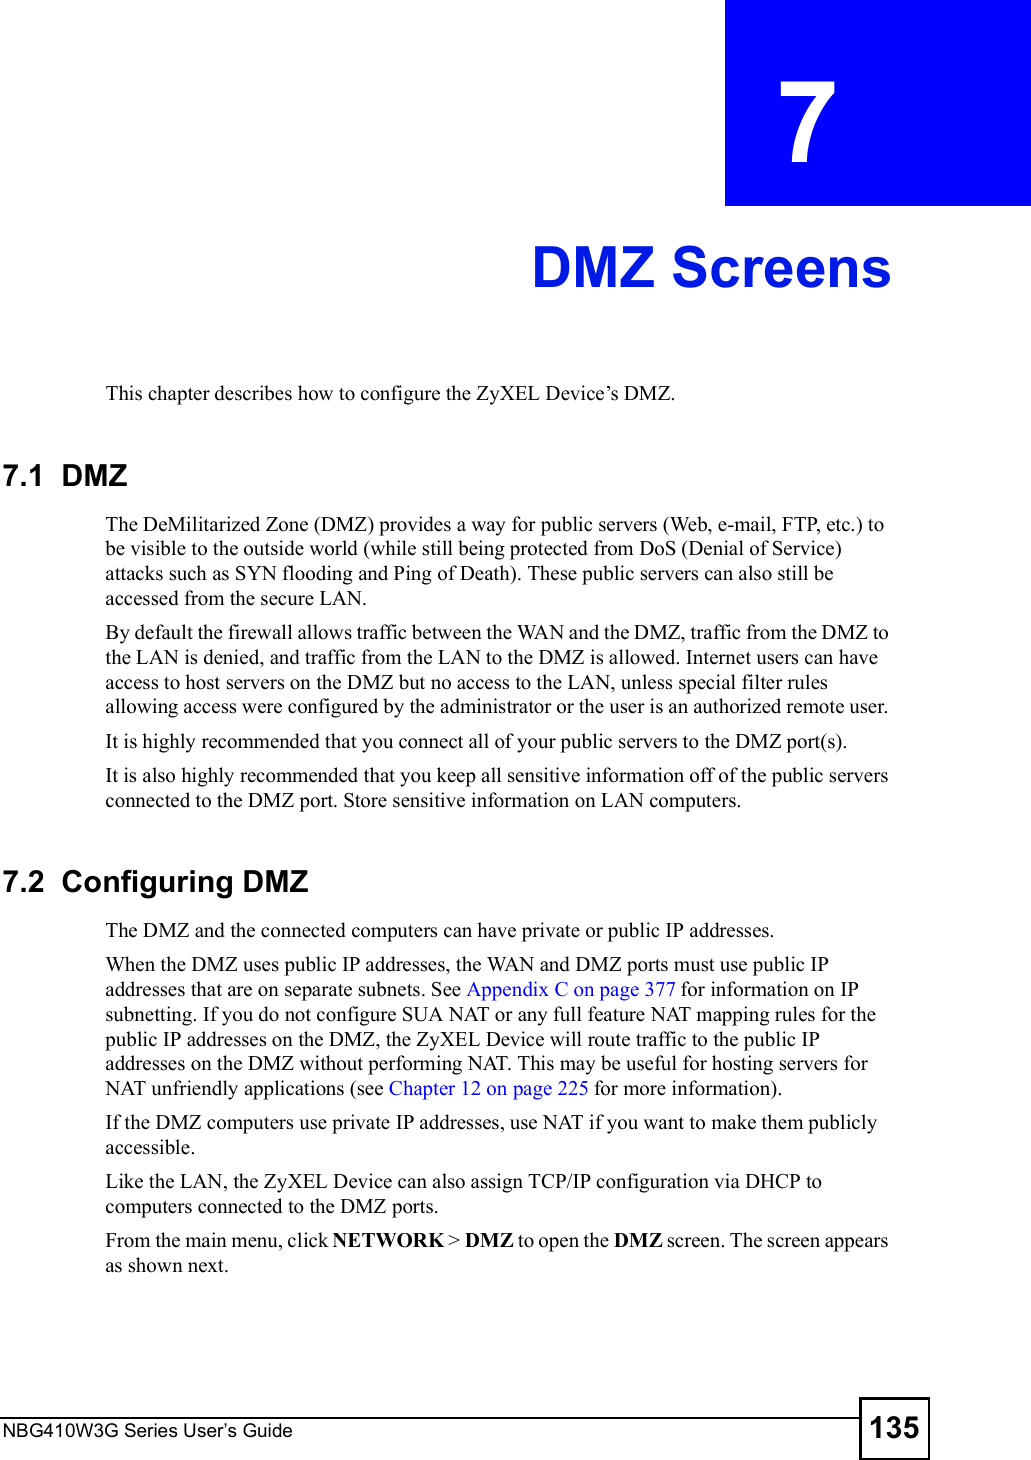 NBG410W3G Series User s Guide 135CHAPTER  7 DMZ ScreensThis chapter describes how to configure the ZyXEL Device!s DMZ.7.1  DMZ The DeMilitarized Zone (DMZ) provides a way for public servers (Web, e-mail, FTP, etc.) to be visible to the outside world (while still being protected from DoS (Denial of Service) attacks such as SYN flooding and Ping of Death). These public servers can also still be accessed from the secure LAN. By default the firewall allows traffic between the WAN and the DMZ, traffic from the DMZ to the LAN is denied, and traffic from the LAN to the DMZ is allowed. Internet users can have access to host servers on the DMZ but no access to the LAN, unless special filter rules allowing access were configured by the administrator or the user is an authorized remote user. It is highly recommended that you connect all of your public servers to the DMZ port(s).It is also highly recommended that you keep all sensitive information off of the public servers connected to the DMZ port. Store sensitive information on LAN computers.7.2  Configuring DMZThe DMZ and the connected computers can have private or public IP addresses.When the DMZ uses public IP addresses, the WAN and DMZ ports must use public IP addresses that are on separate subnets. See Appendix C on page 377 for information on IP subnetting. If you do not configure SUA NAT or any full feature NAT mapping rules for the public IP addresses on the DMZ, the ZyXEL Device will route traffic to the public IP addresses on the DMZ without performing NAT. This may be useful for hosting servers for NAT unfriendly applications (see Chapter 12 on page 225 for more information).If the DMZ computers use private IP addresses, use NAT if you want to make them publicly accessible. Like the LAN, the ZyXEL Device can also assign TCP/IP configuration via DHCP to computers connected to the DMZ ports. From the main menu, click NETWORK &gt; DMZ to open the DMZ screen. The screen appears as shown next.